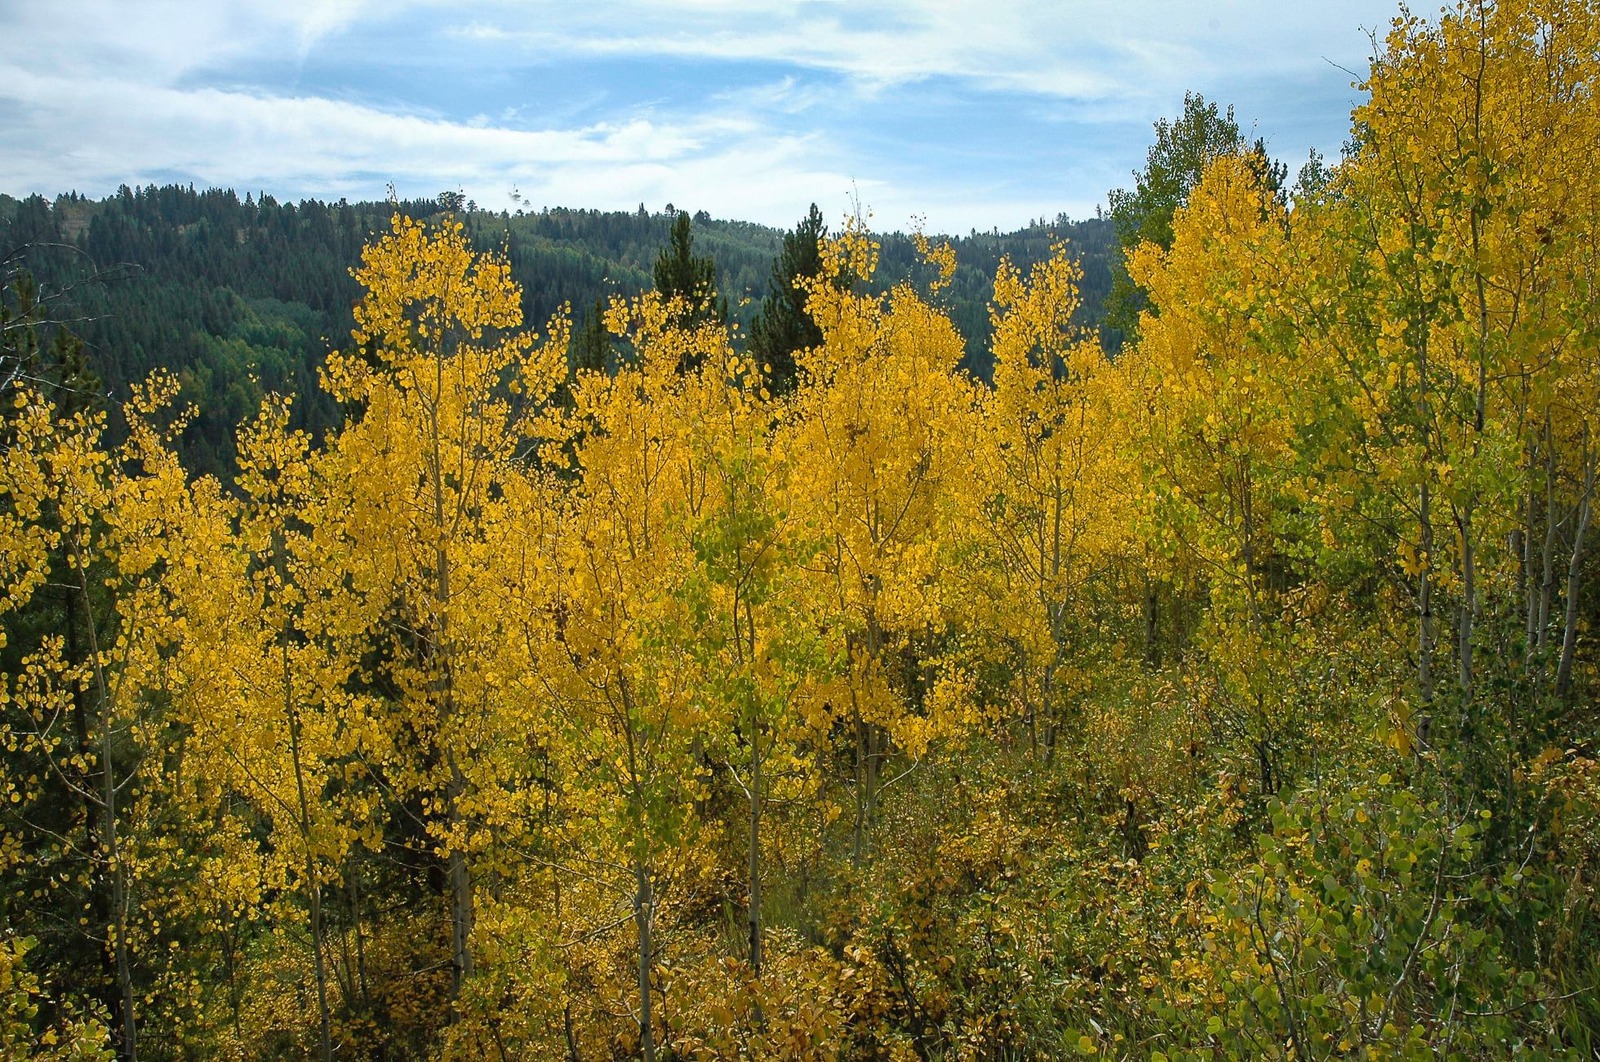 The glow of aspens means we are closer to winter than summer, a metaphor that touches the emotions of many MoJo readers or their loved ones, especially in these uncertain times. Photo courtesy Susan Marsh